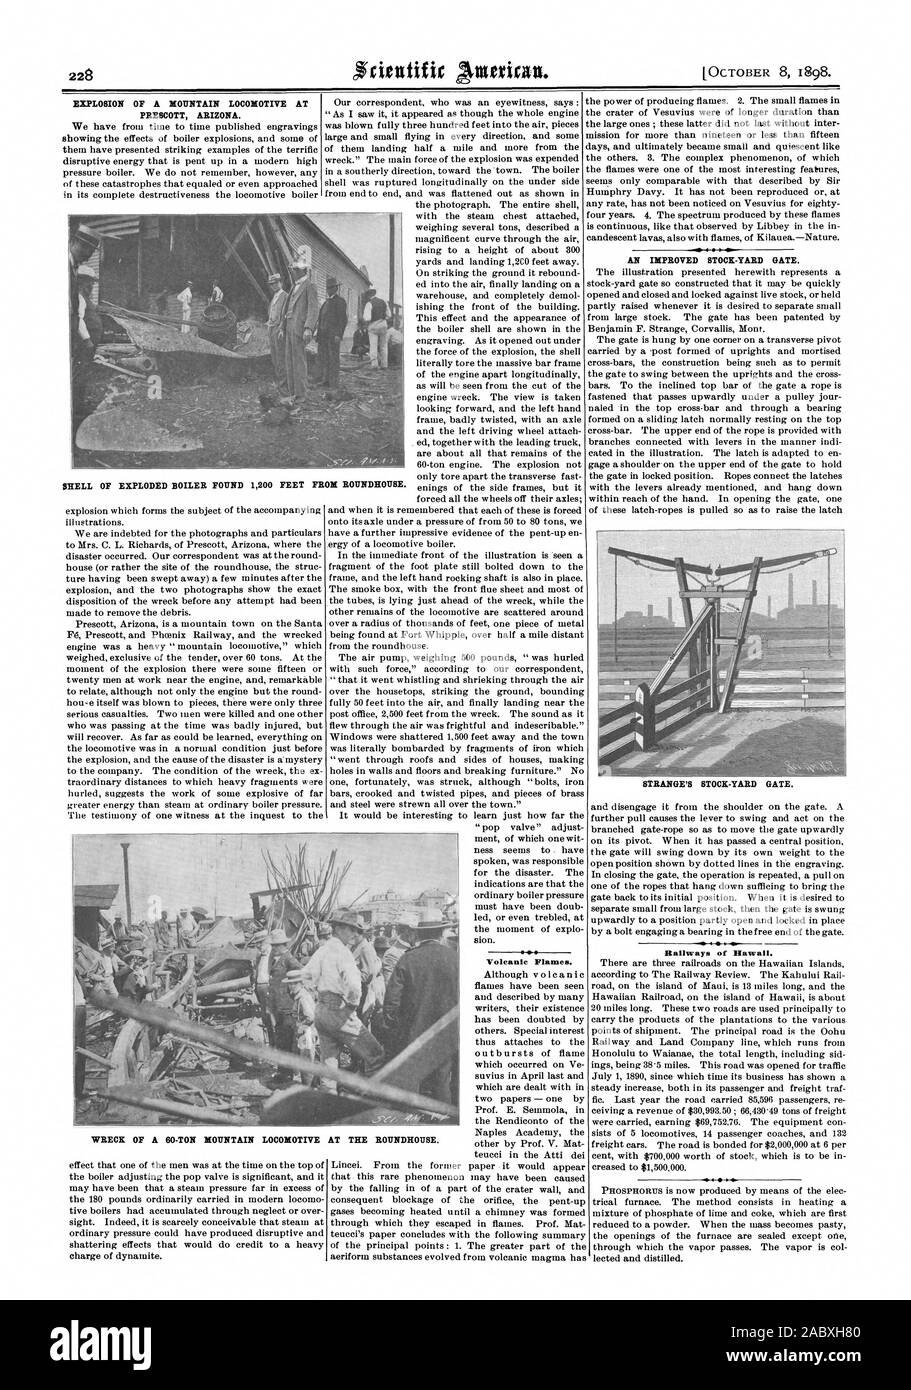 EXPLOSION OF A MOUNTAIN LOCOMOTIVE AT PRESCOTT ARIZONA. Volcanic Flames. 4 0 AN IMPROVED STOCK-YARD GATE. STRANGE'S STOCK-YARD GATE. Railways of Hawaii. SHELL OF EXPLODED BOILER FOUND 1200 FEET FROM ROUNDHOUSE., scientific american, 1898-10-08 Stock Photo